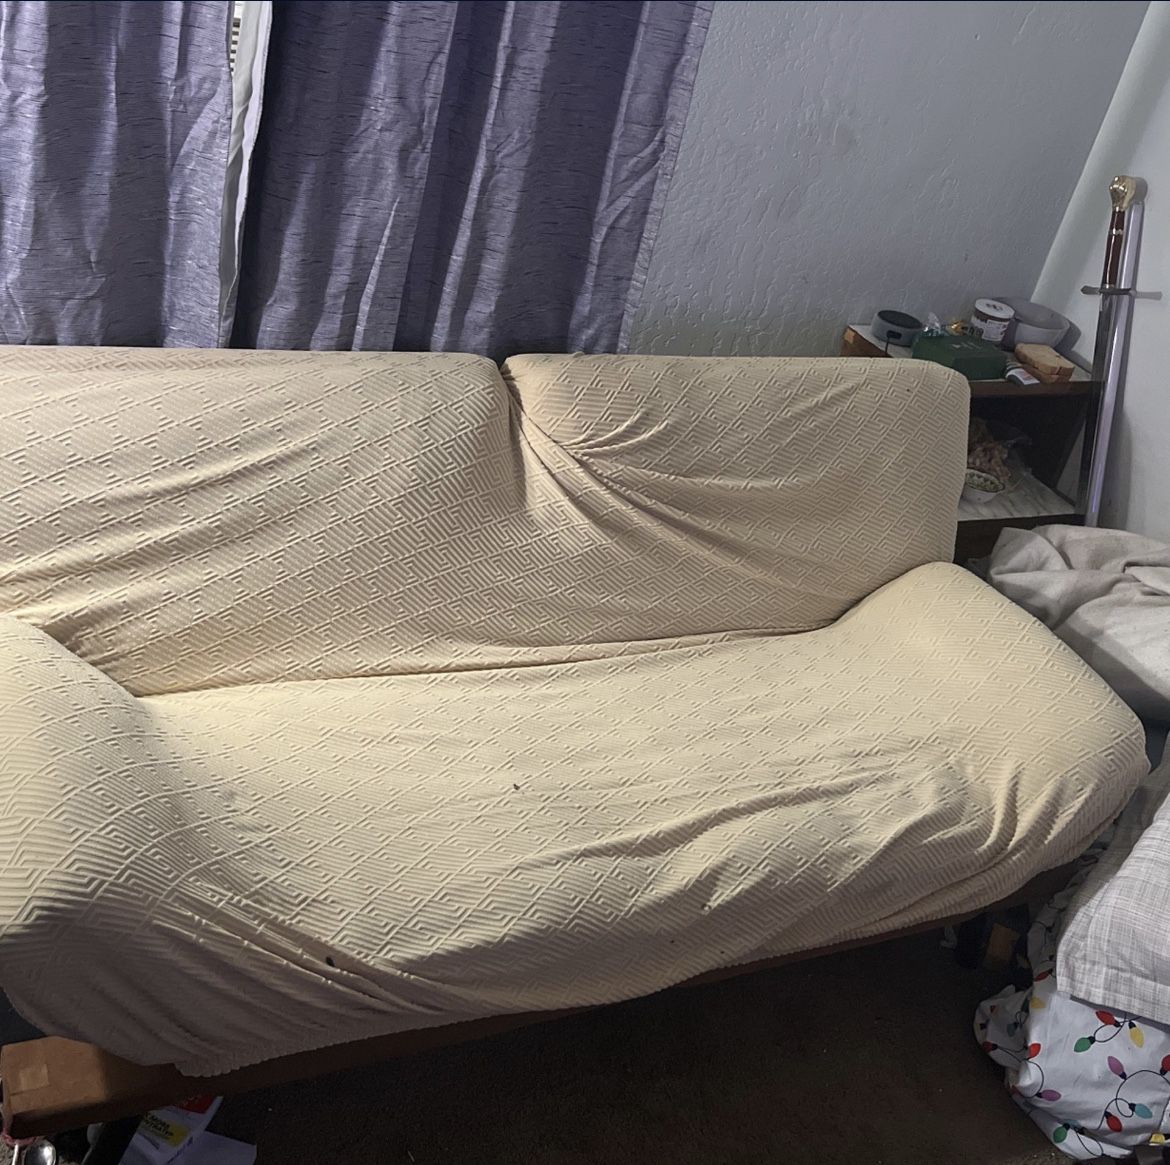 Futon and Sheet Cover